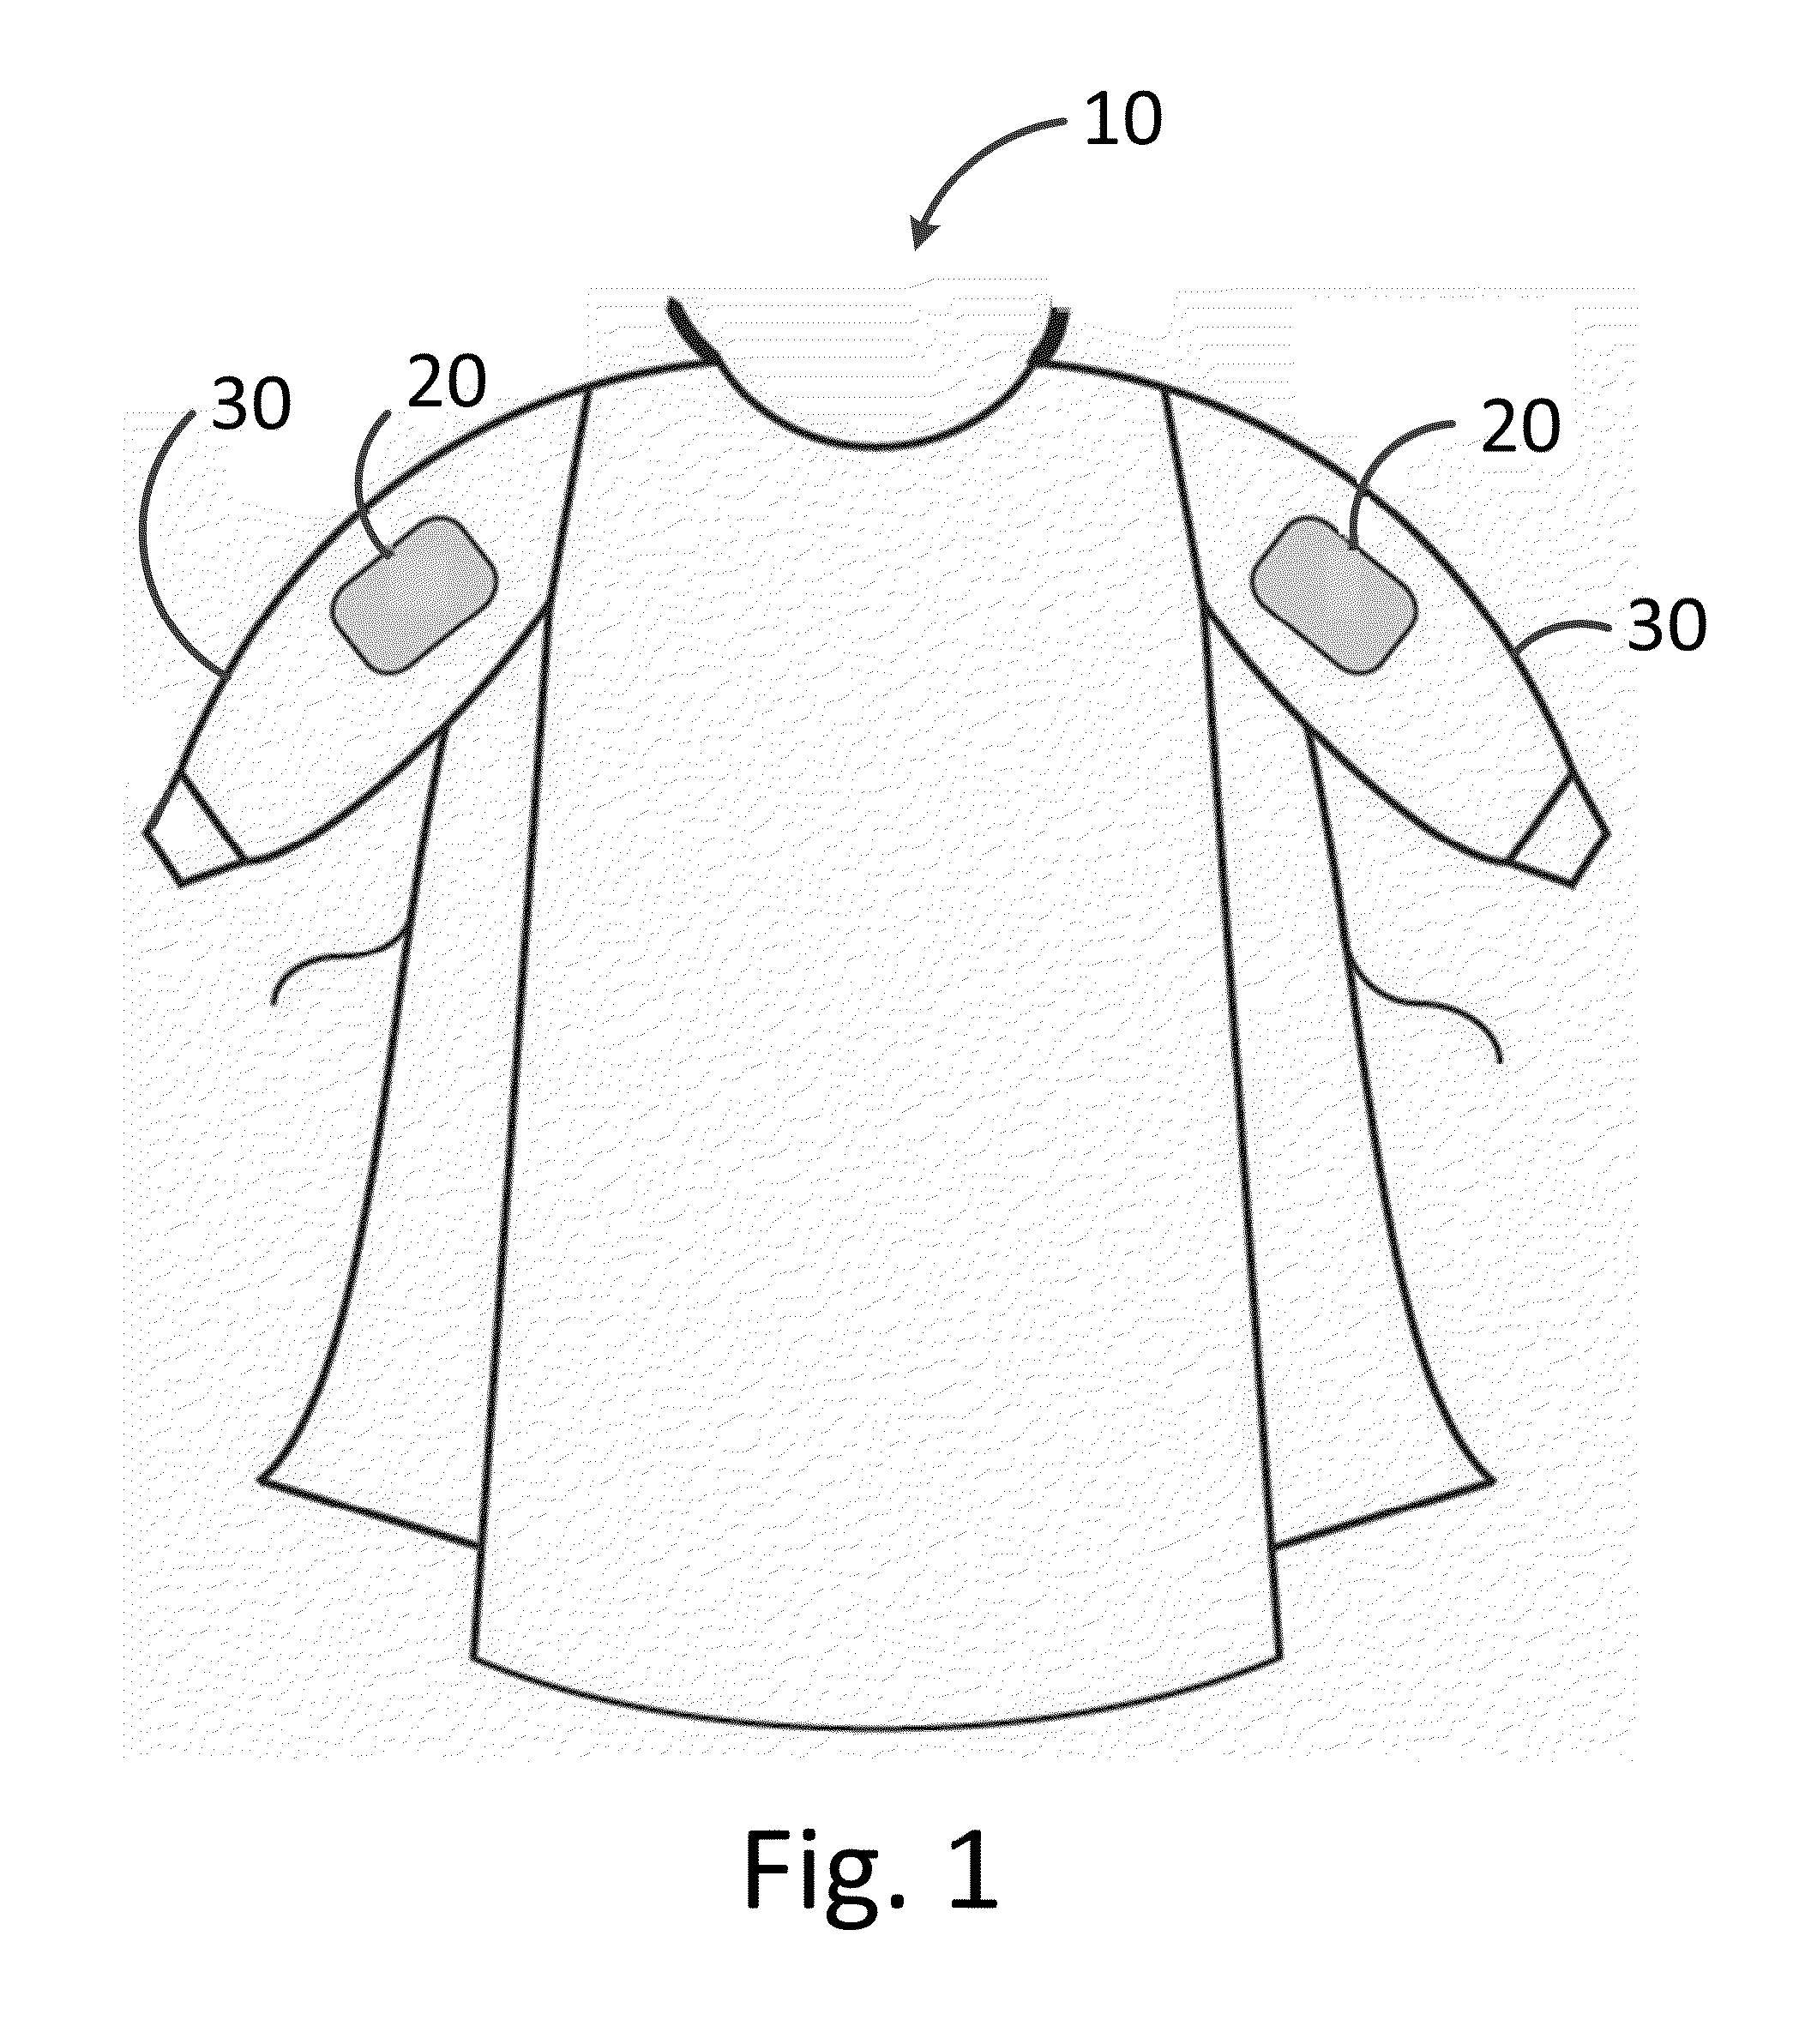 Surgical gown with functional window